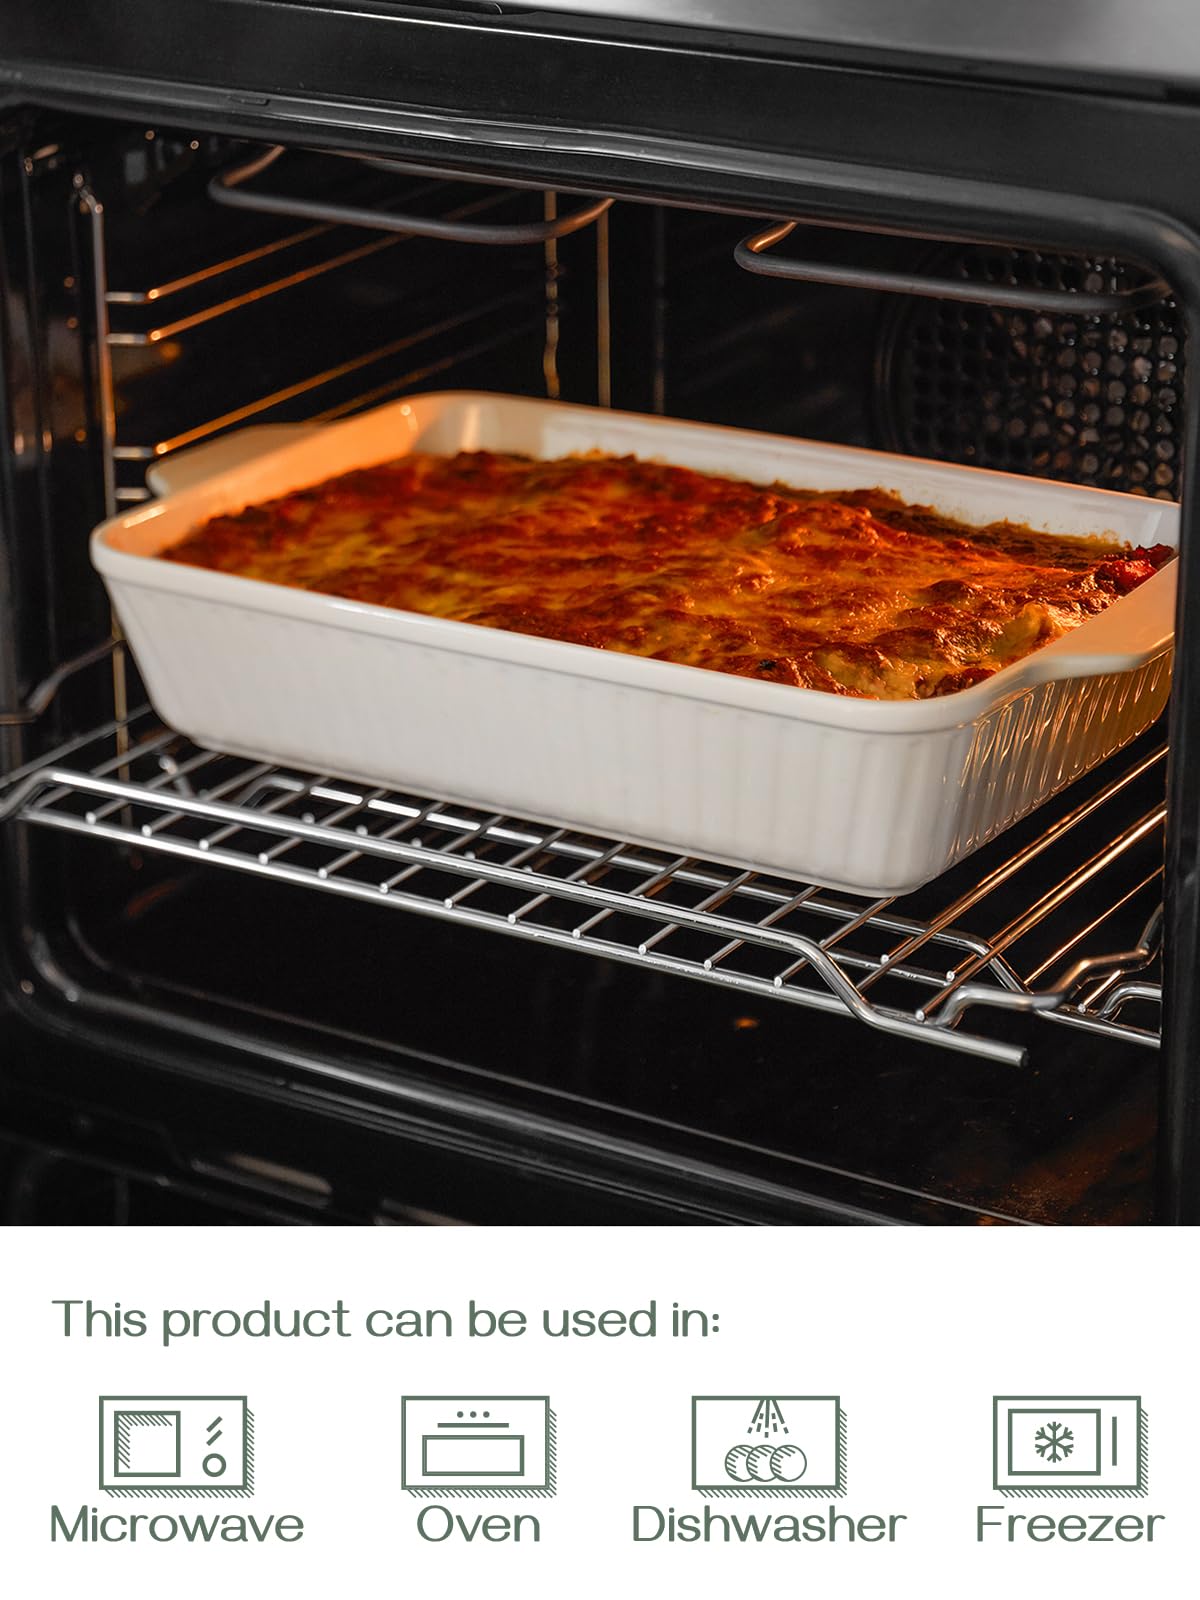 DOWAN Casserole Dish, 9x13 Ceramic Baking Dish, Large Lasagna Pan Deep, Casserole Dishes for Oven, 135 oz Deep Baking Pan with Handles, Oven Safe and Durable Bakeware for Lasagna, Roasts, Wedding Gifts, White